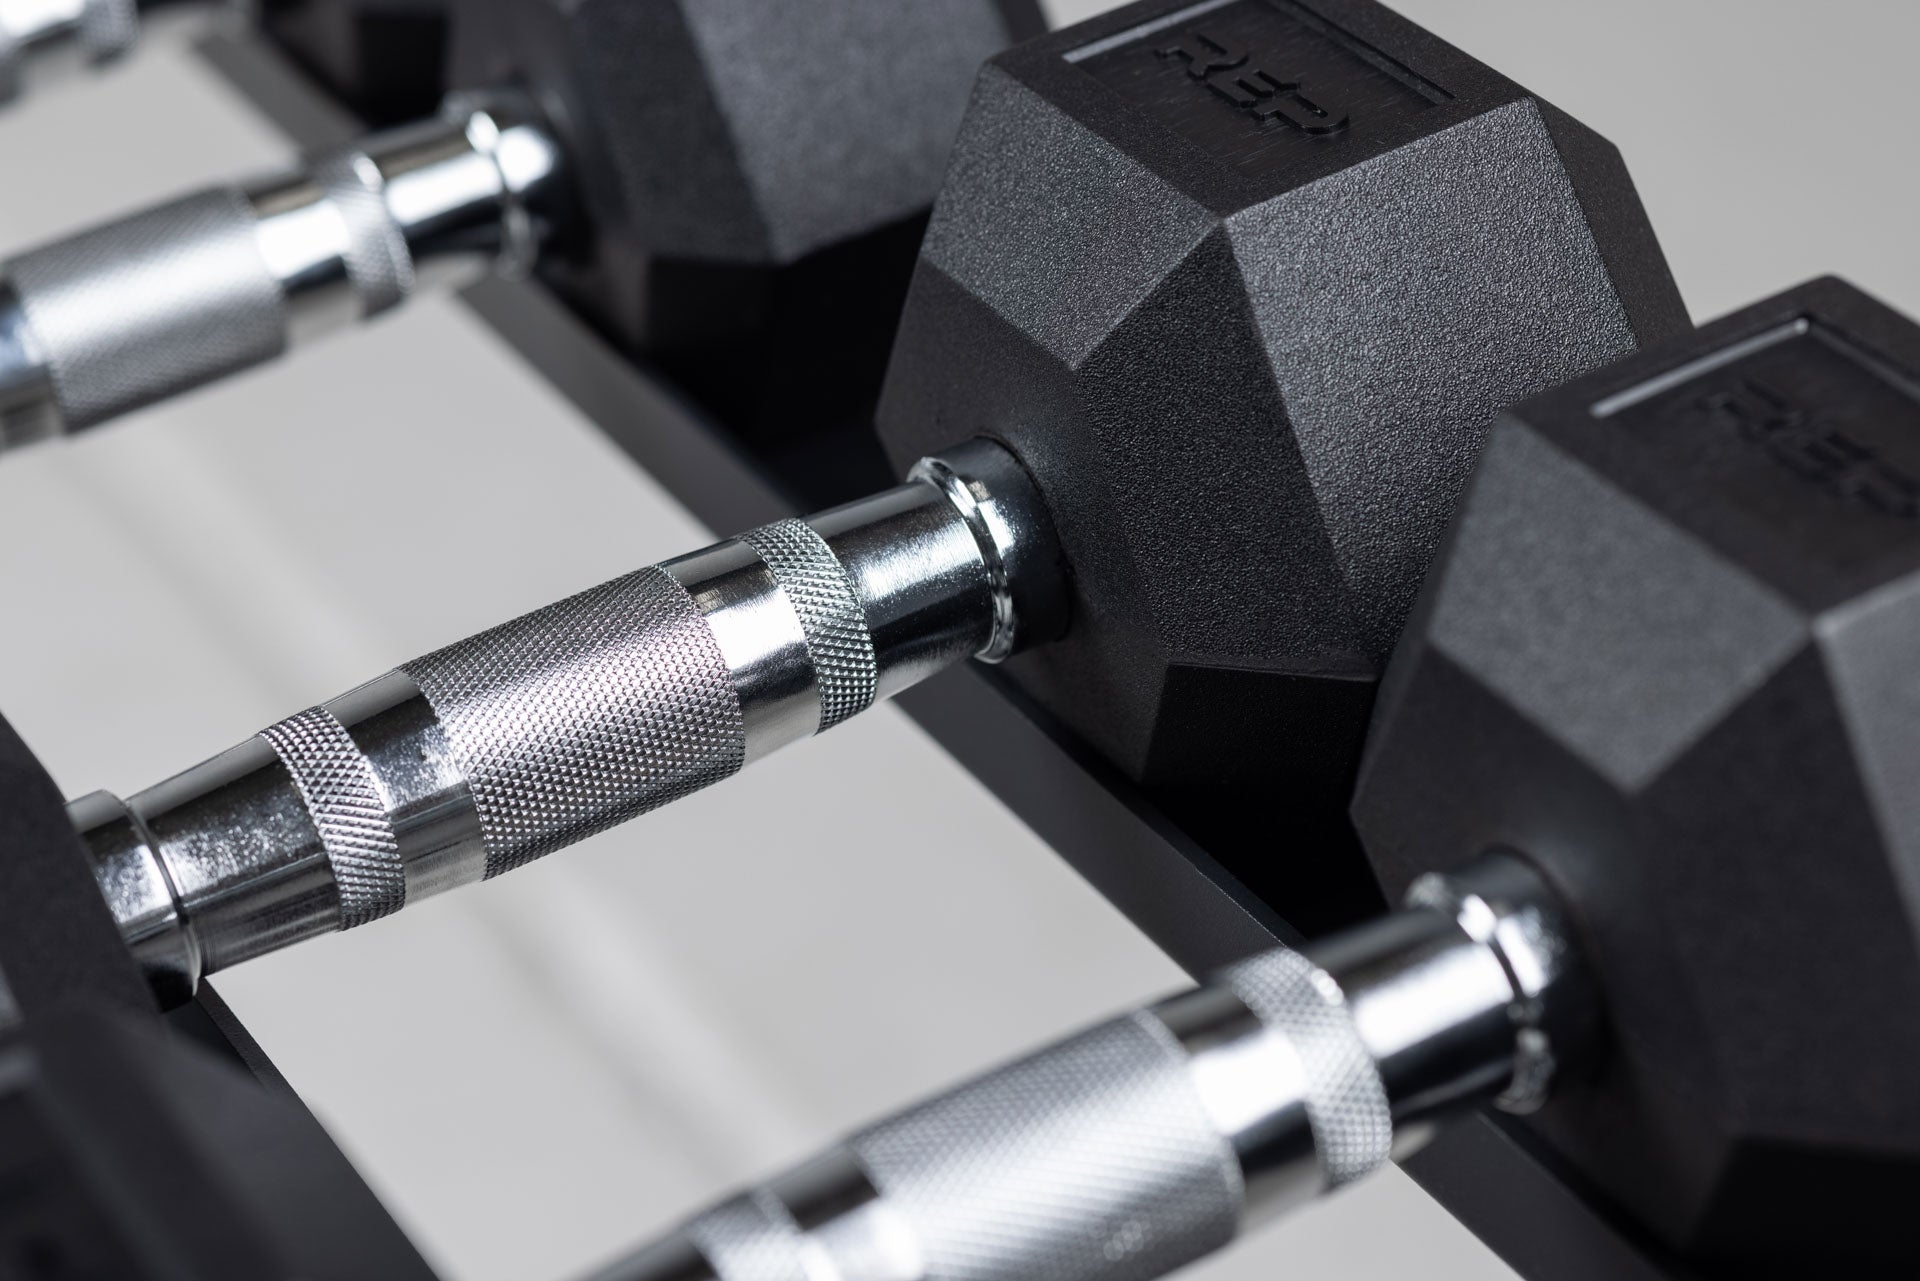 Close-up view of the ergonomic handles and hexagon heads of a pair of Ergo Hex Dumbbells being stored on a REP Dumbbell Rack.